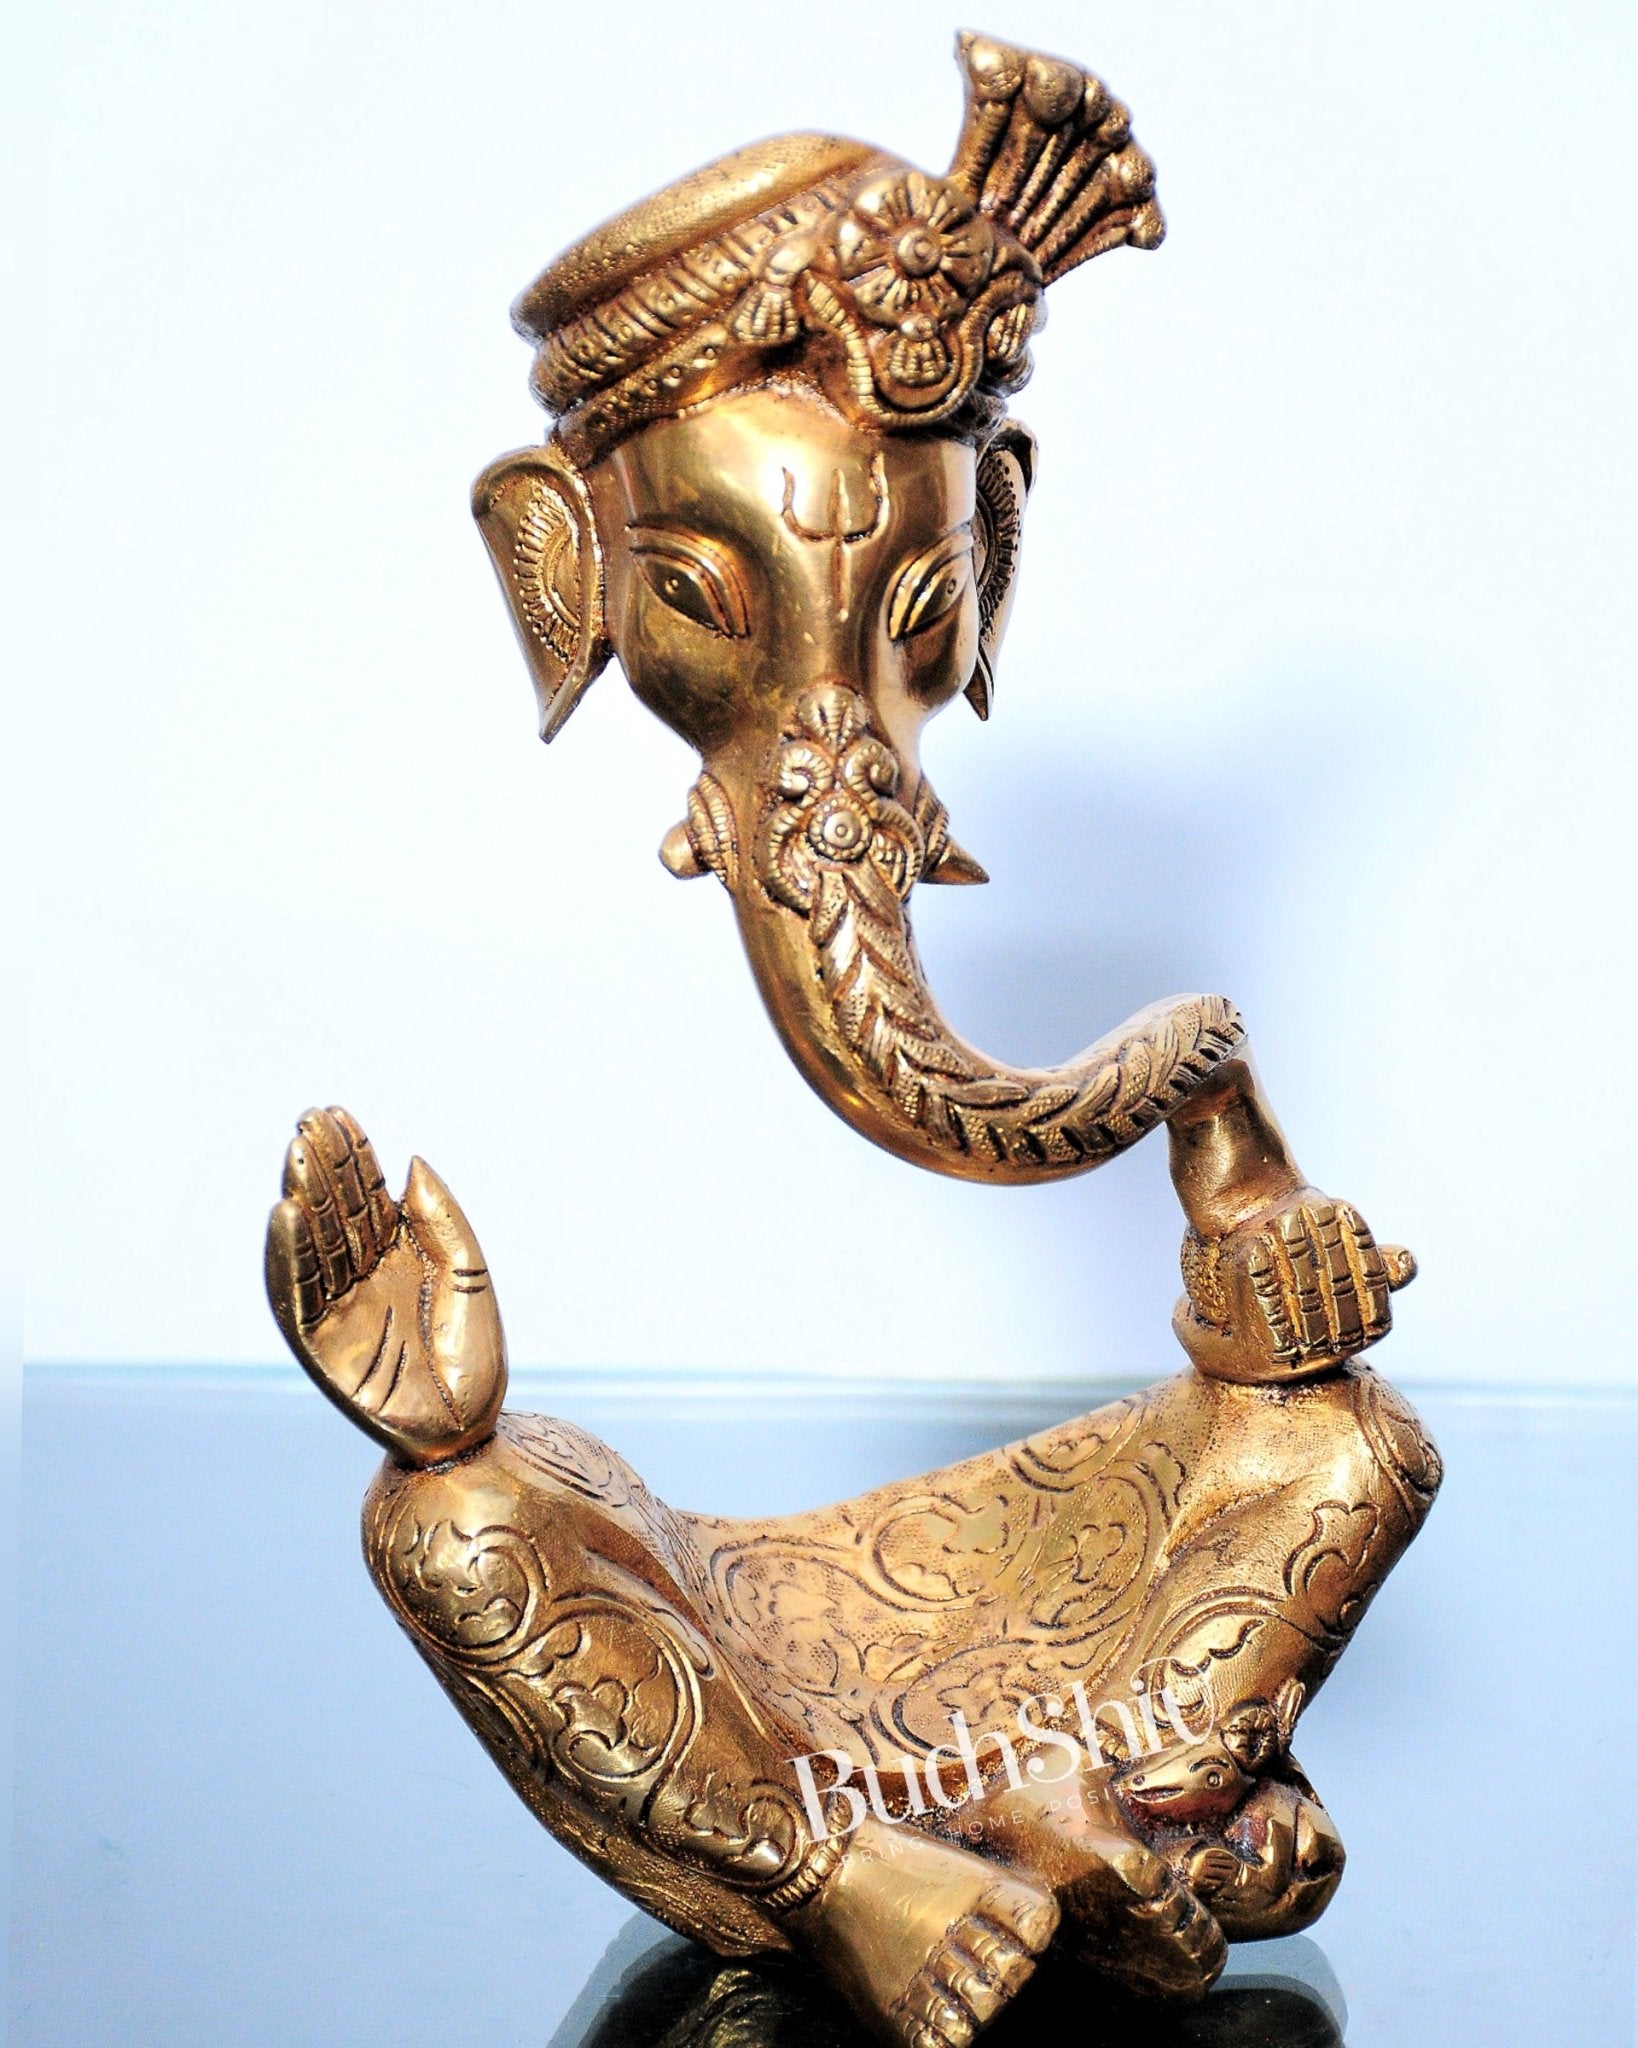 Modern Ganesha abstract unique brass idol/ wearing a pagdi/turban with mouse | suitable for office desk/study table/ temple(golden) - Budhshiv.com